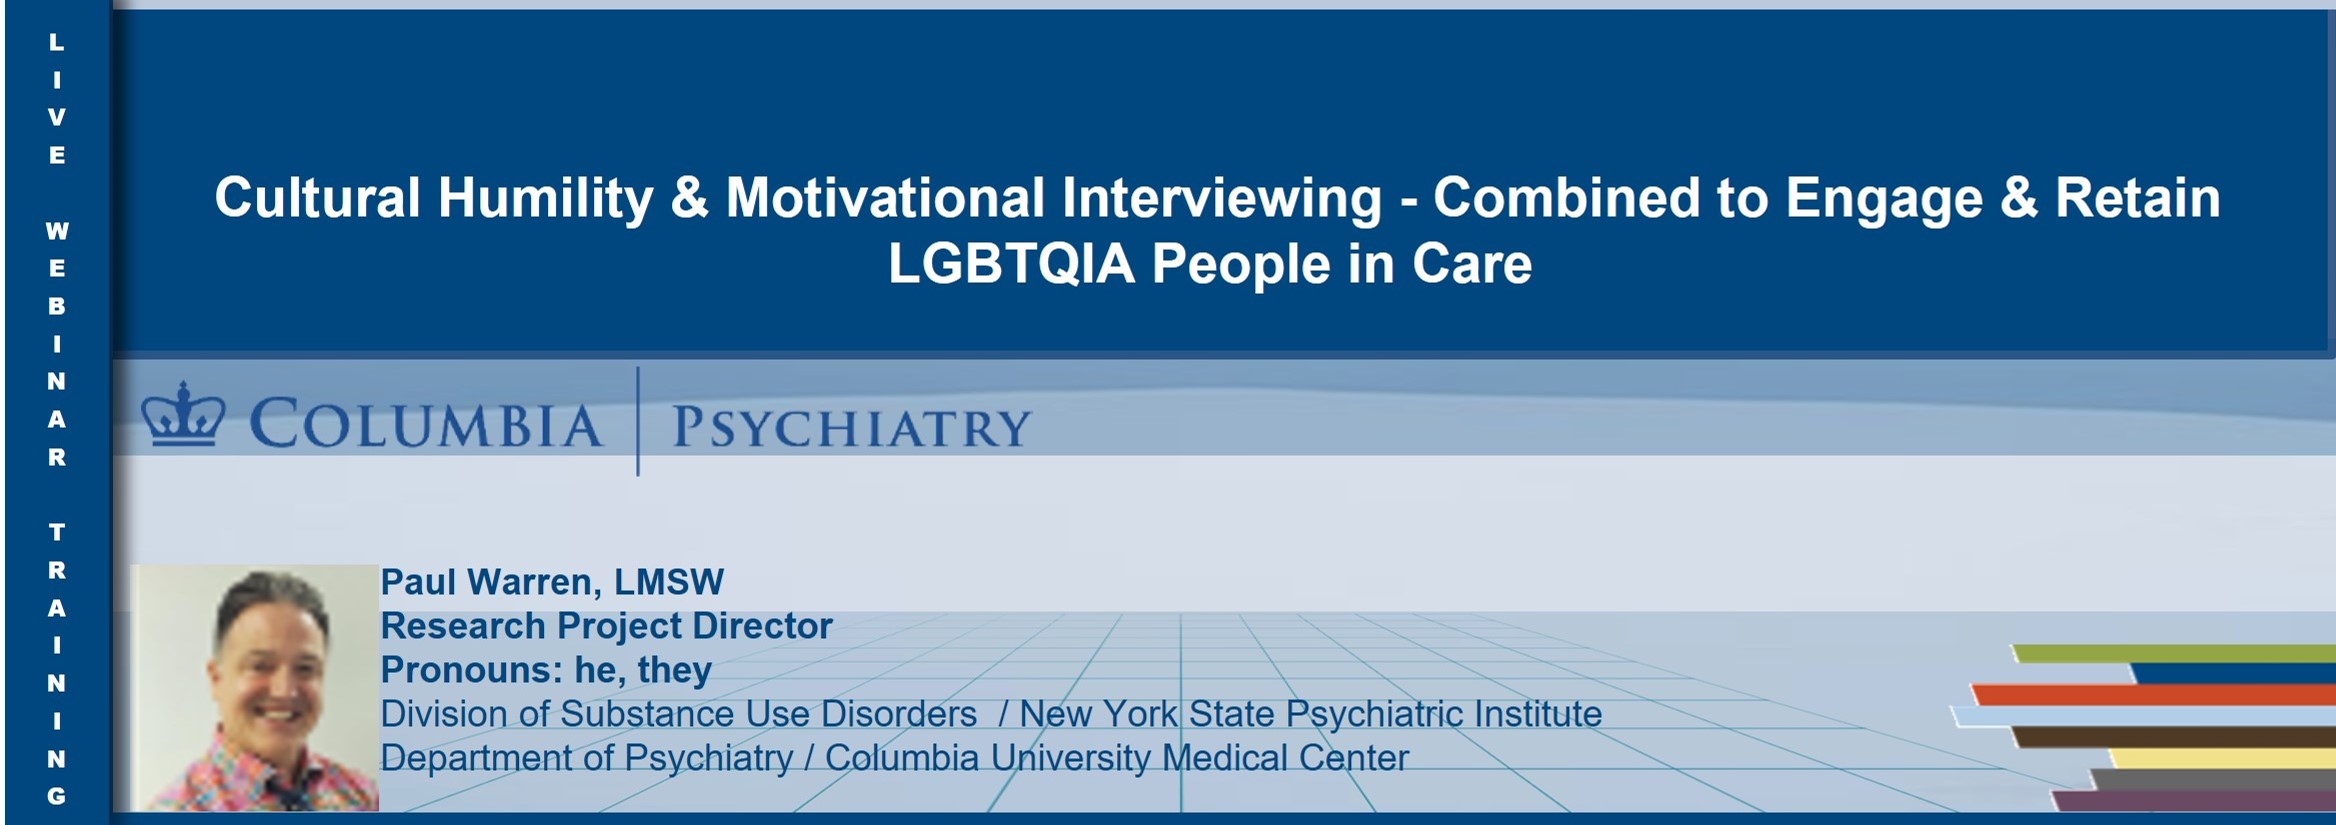 Cultural Humility & Motivational Interviewing – Combined to Engage & Retain LGBTQIA People in Care